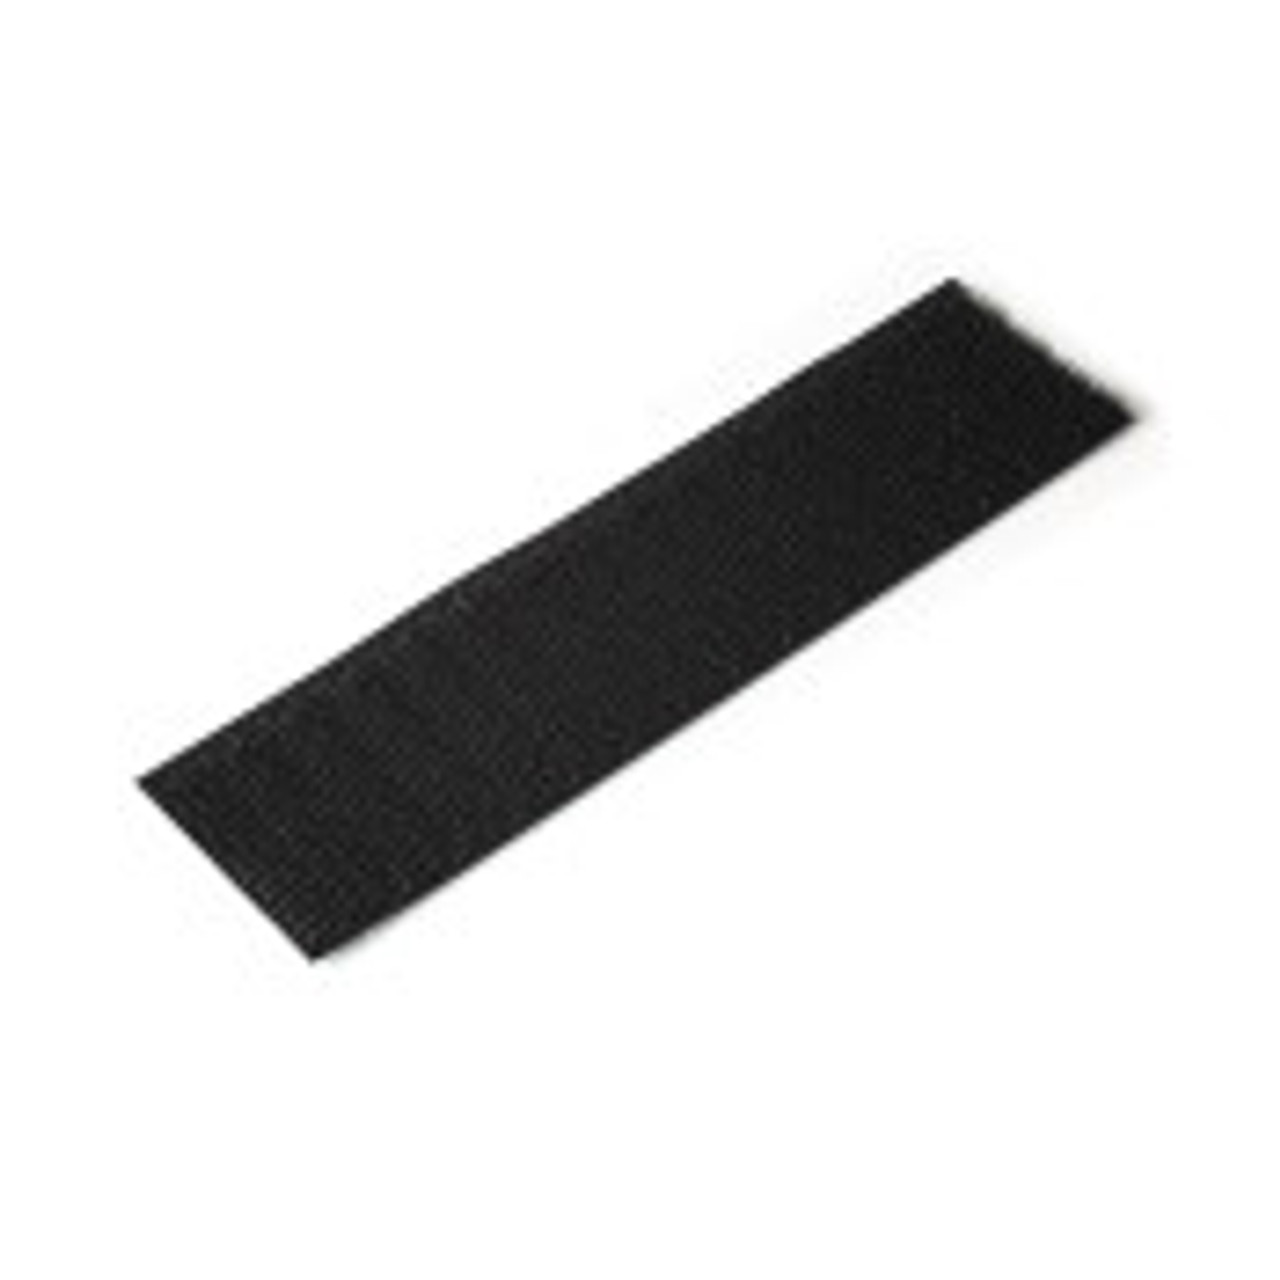 1 VELCRO® Brand Sew-On Fastener - by the yard